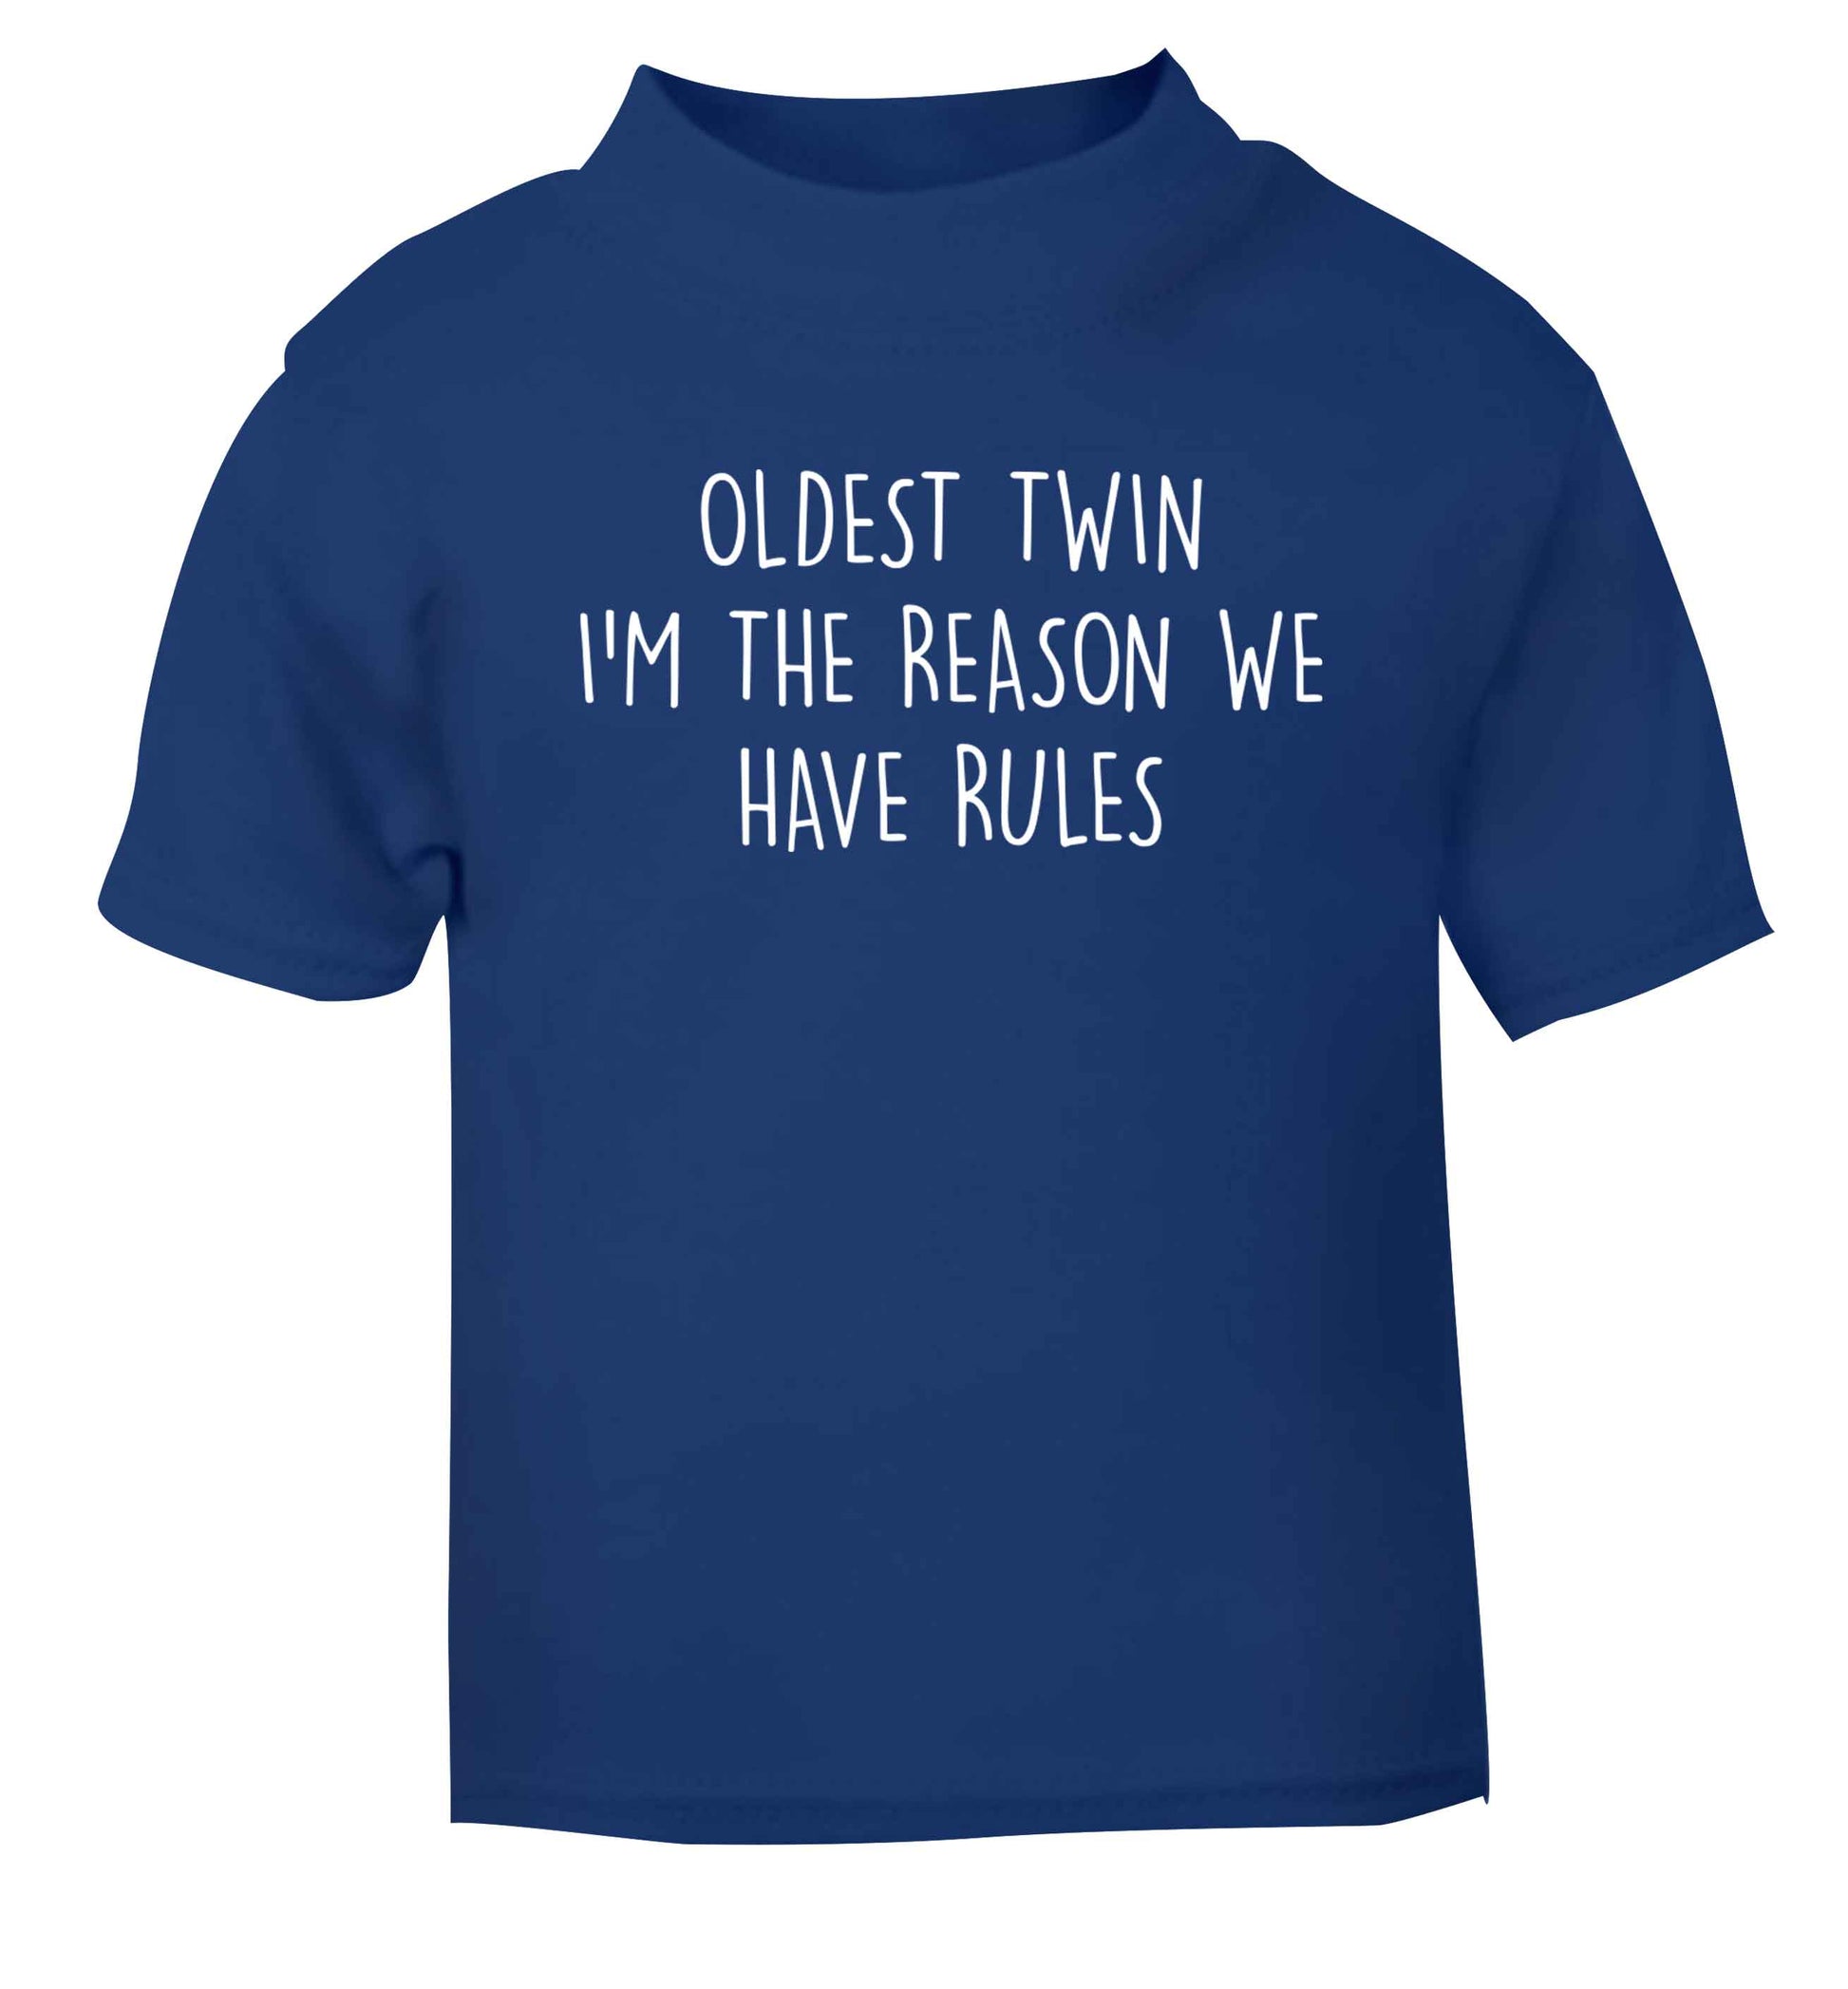 Oldest twin I'm the reason we have rules blue baby toddler Tshirt 2 Years